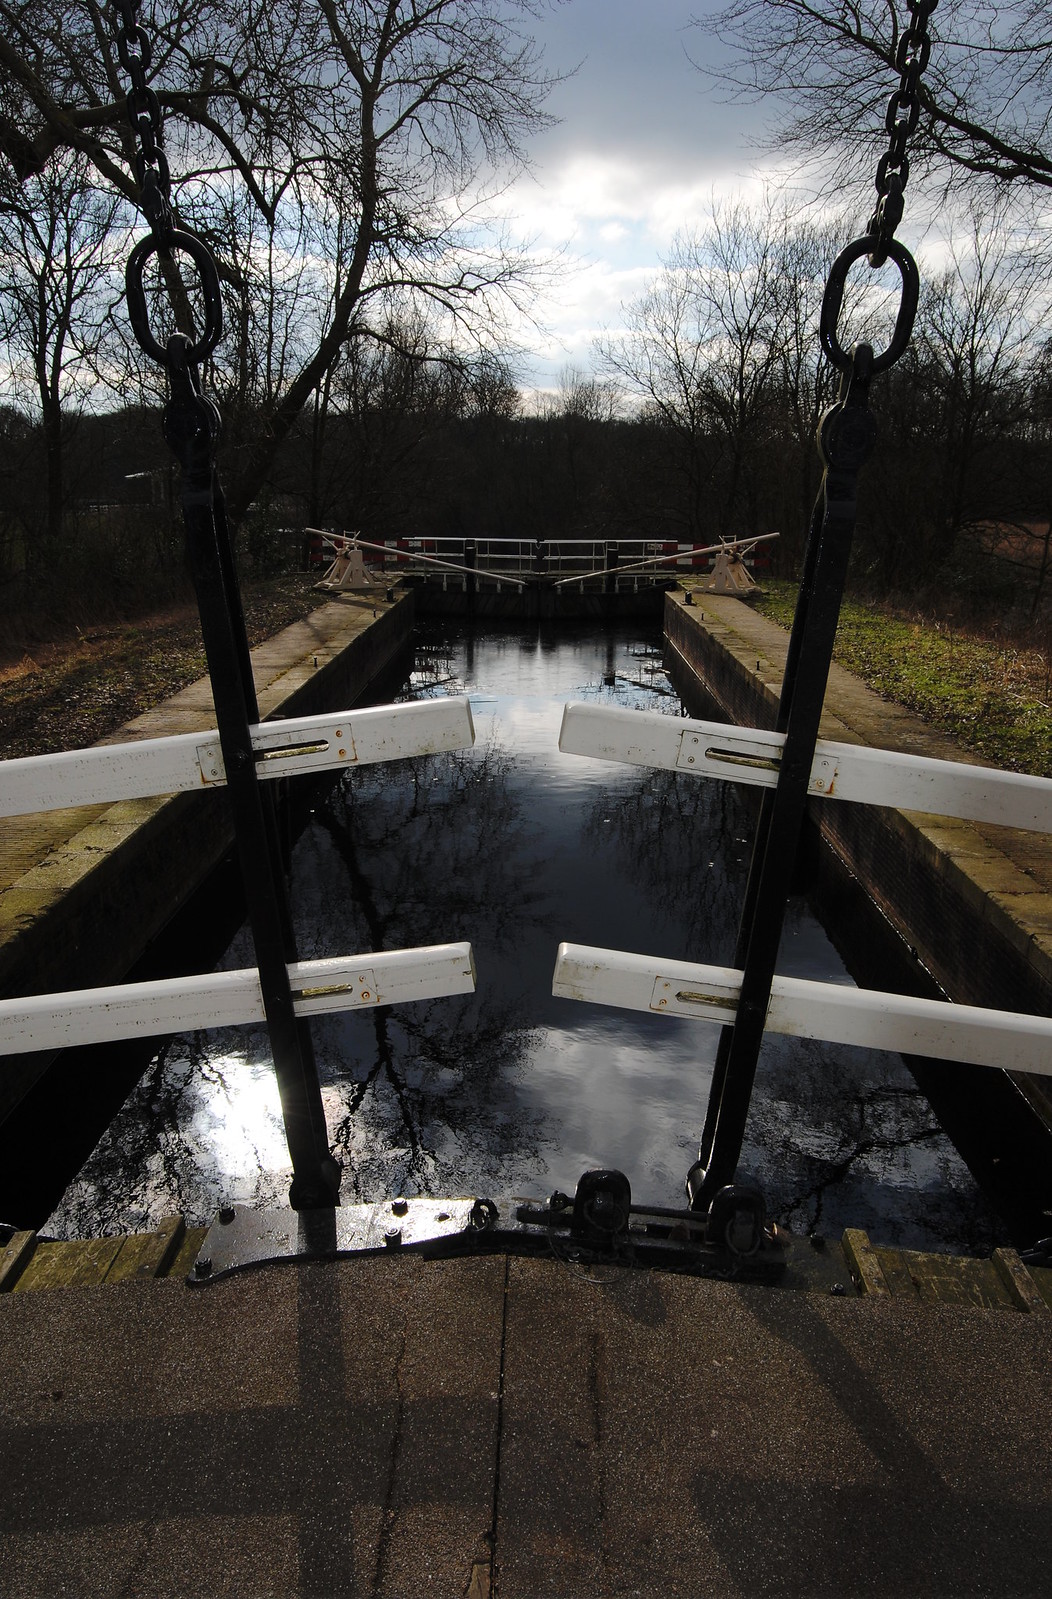 A traditional bridge and water lock in the Amsterdamse Bos.